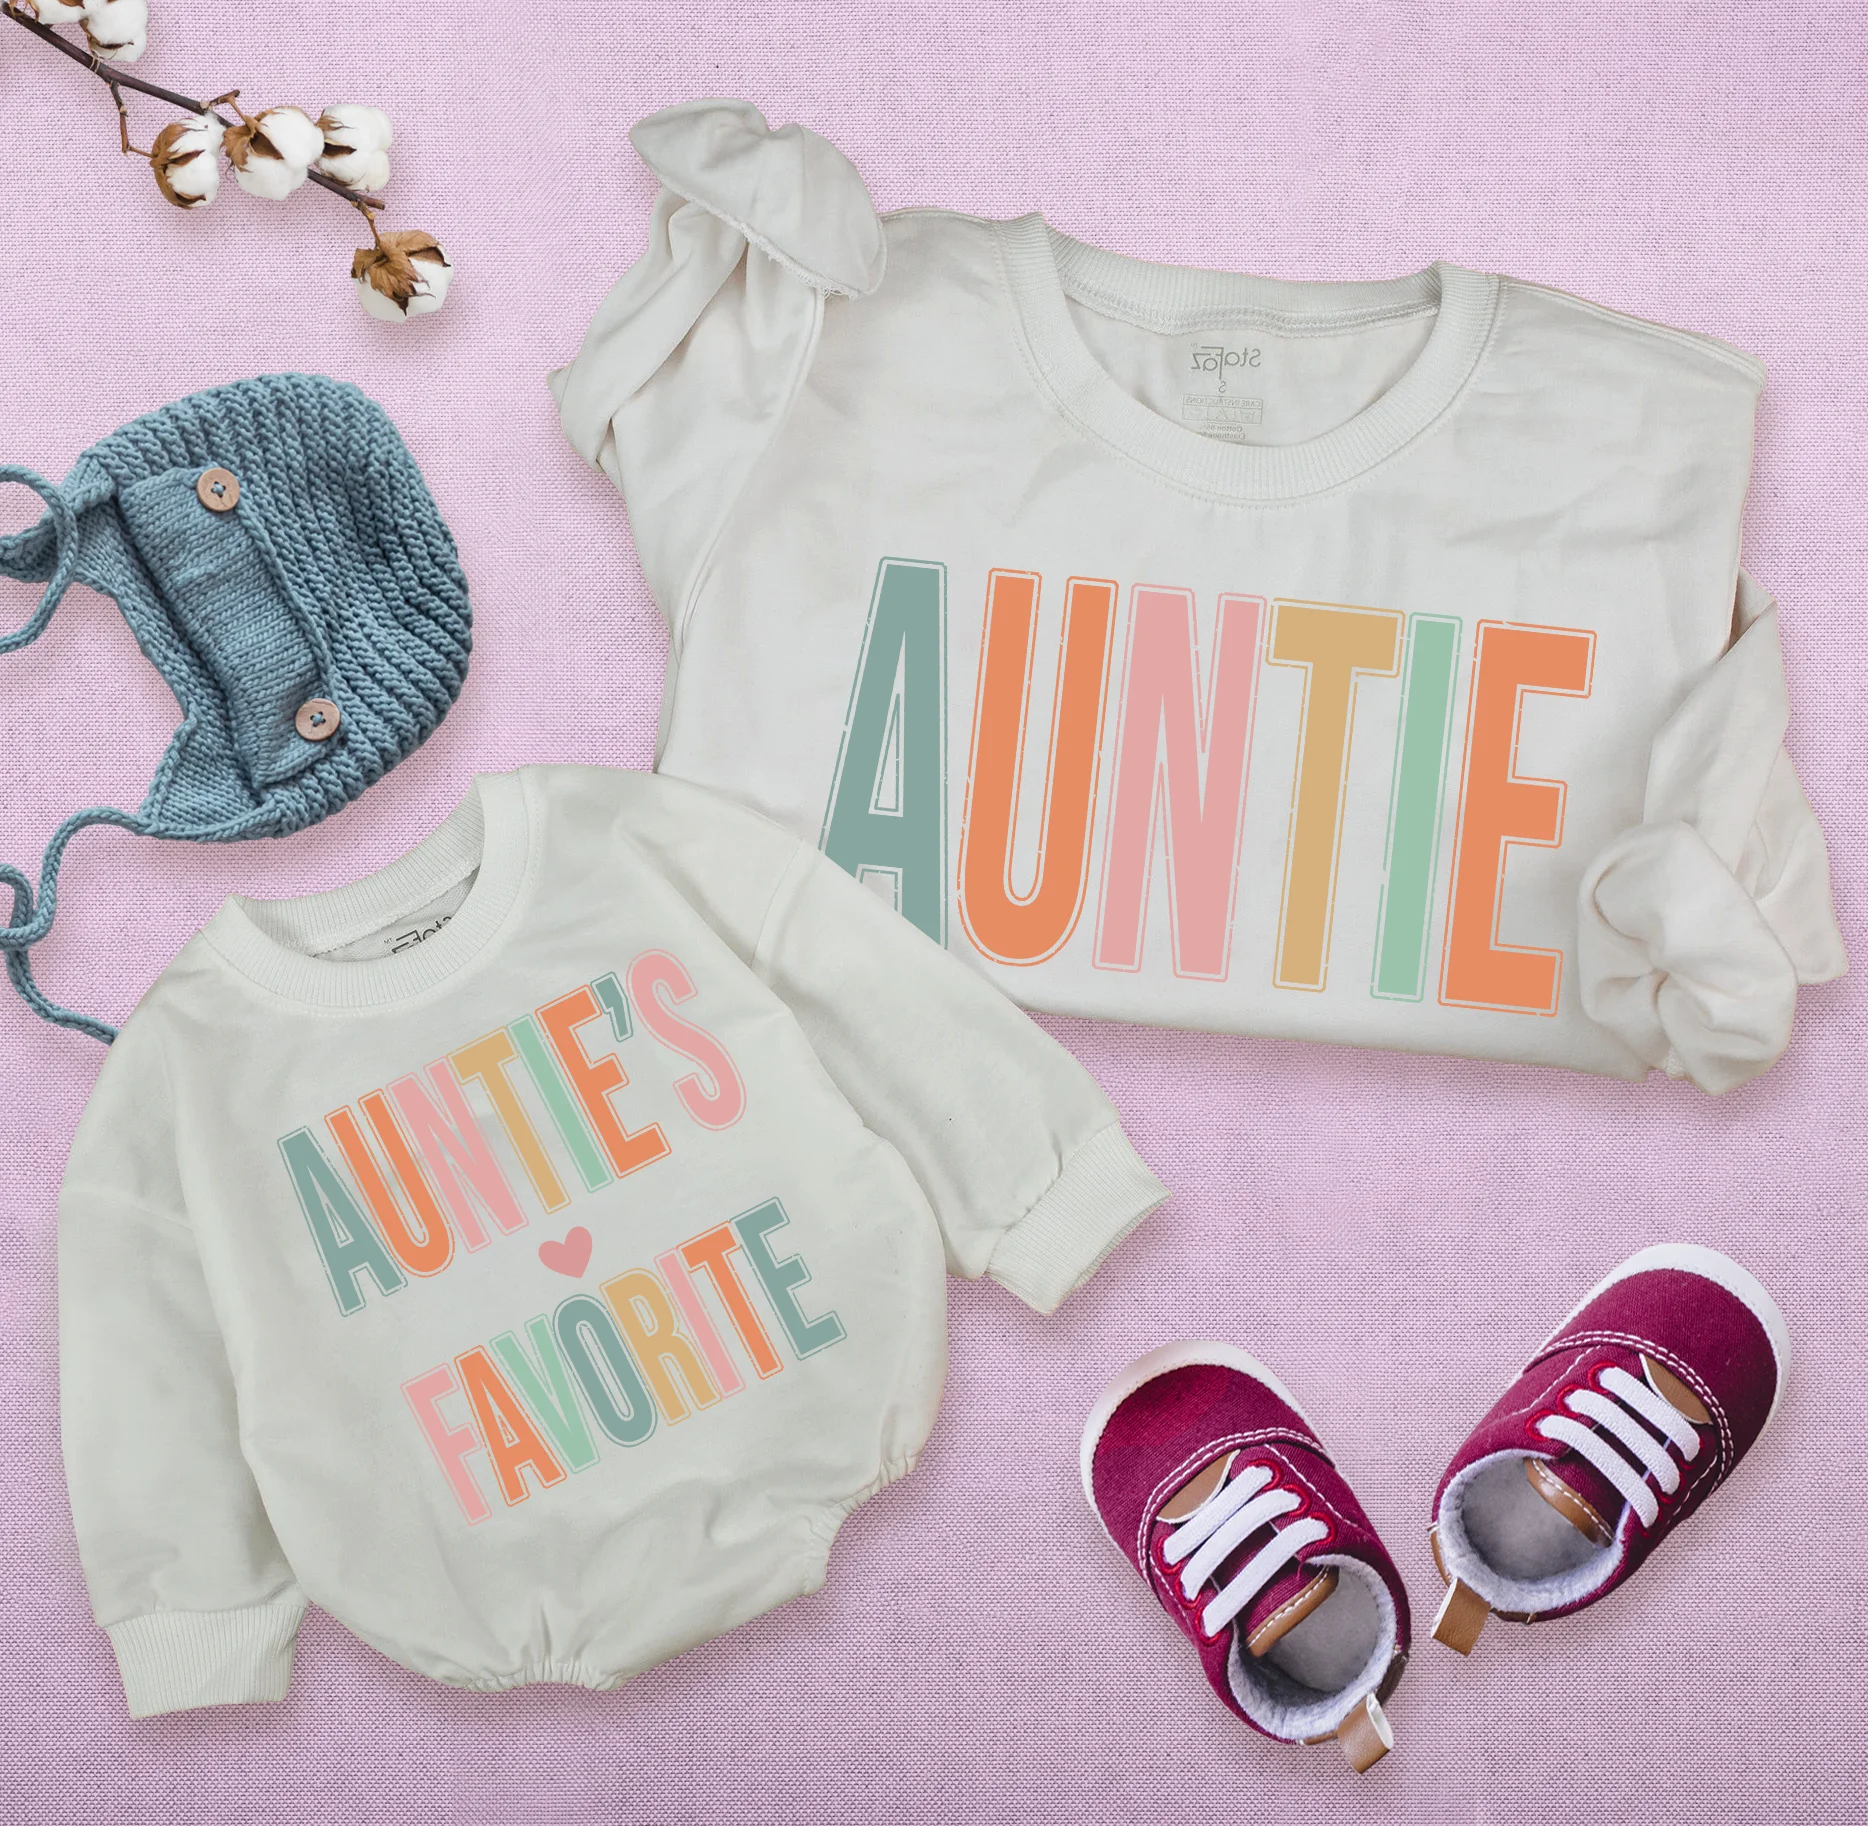 Auntie And Auntie's Favorite Personalized Matching Romper: Coordinated Comfort